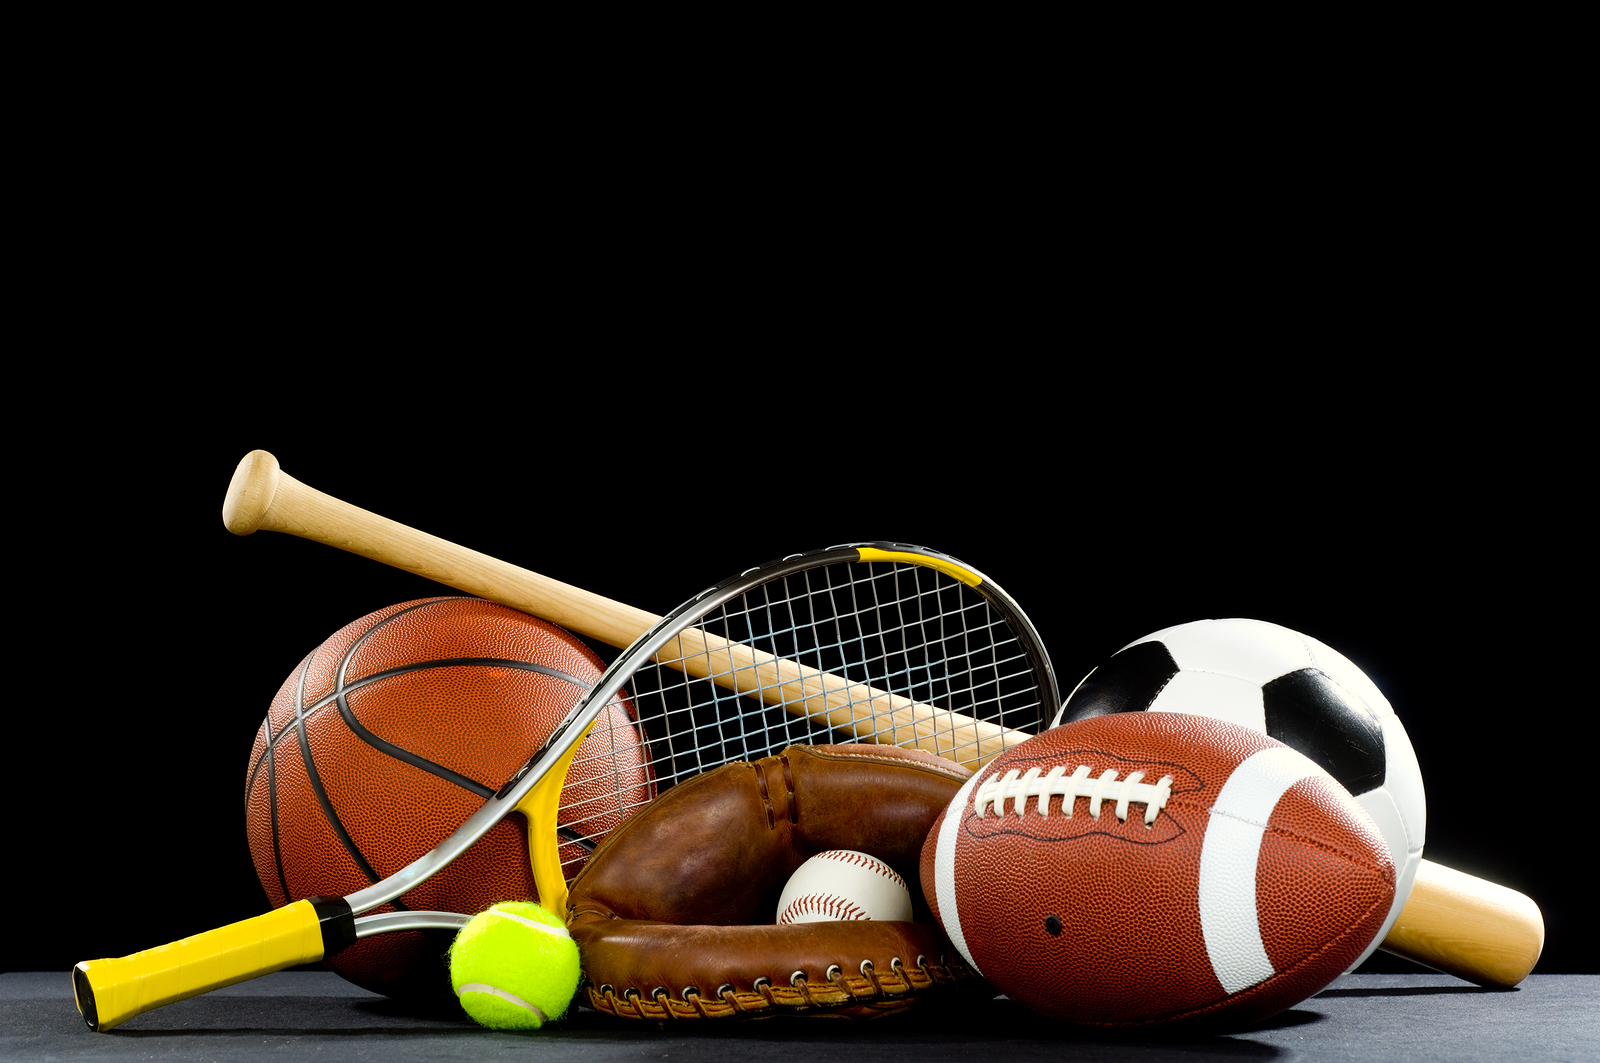 This 25-Question General Knowledge Quiz Will Determine If You Know a Little or a Lot Sports Equipment